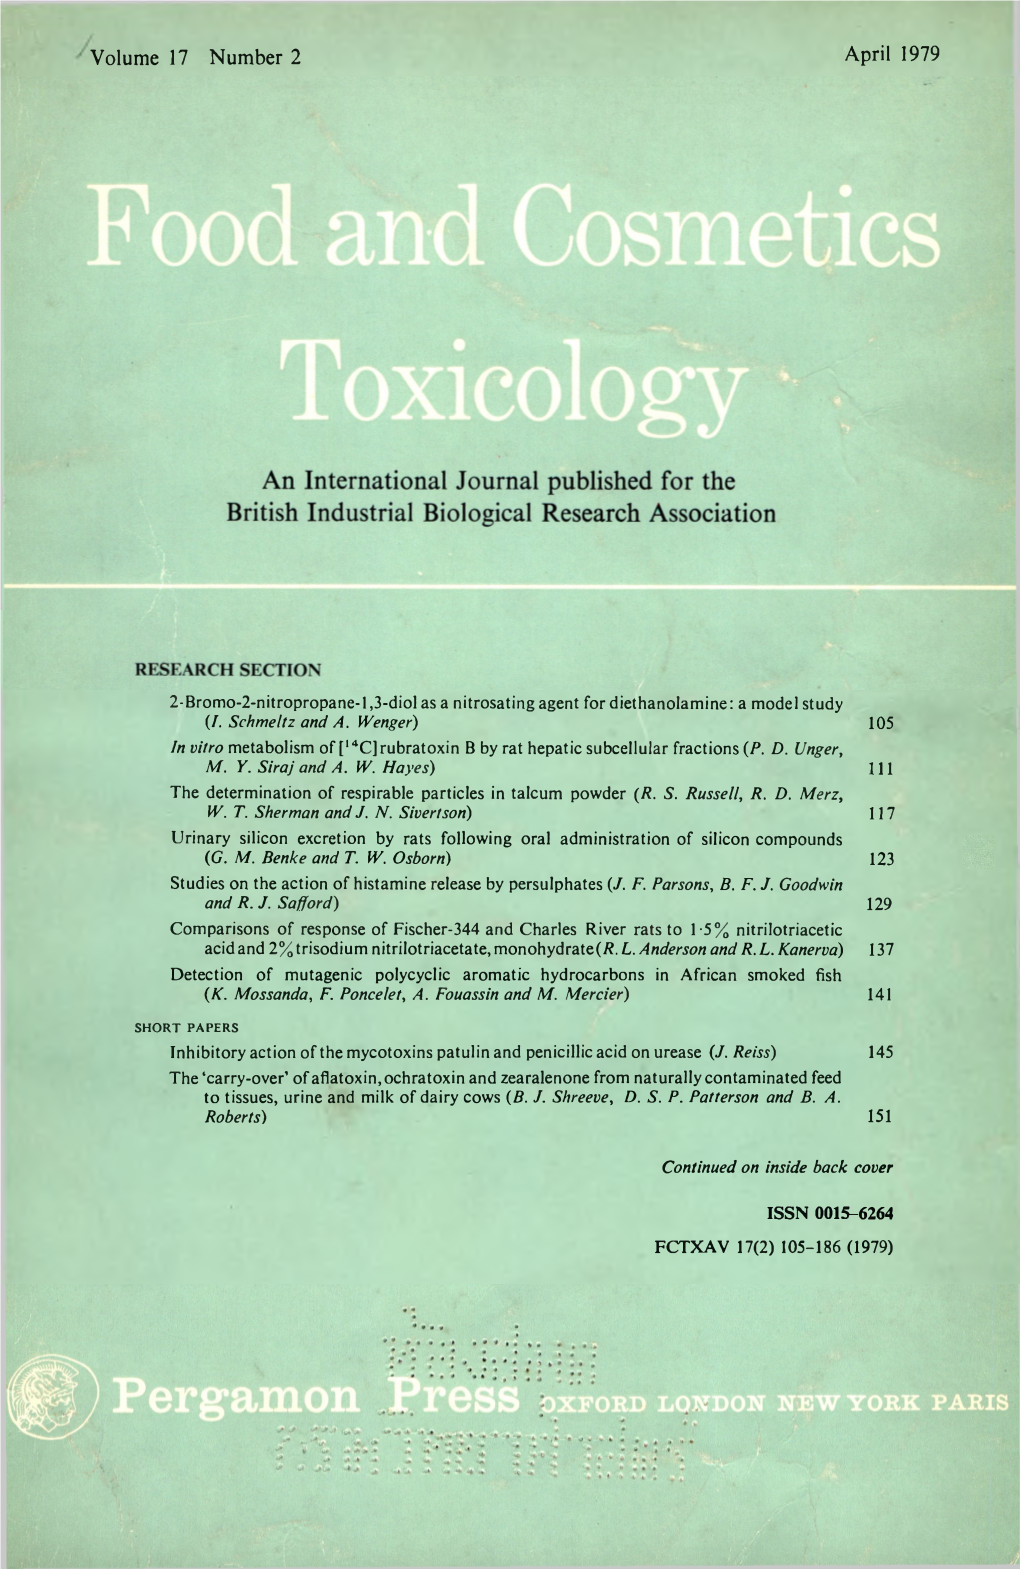 Food and Cosmetics Toxicology 1979 Volume 17 No.2